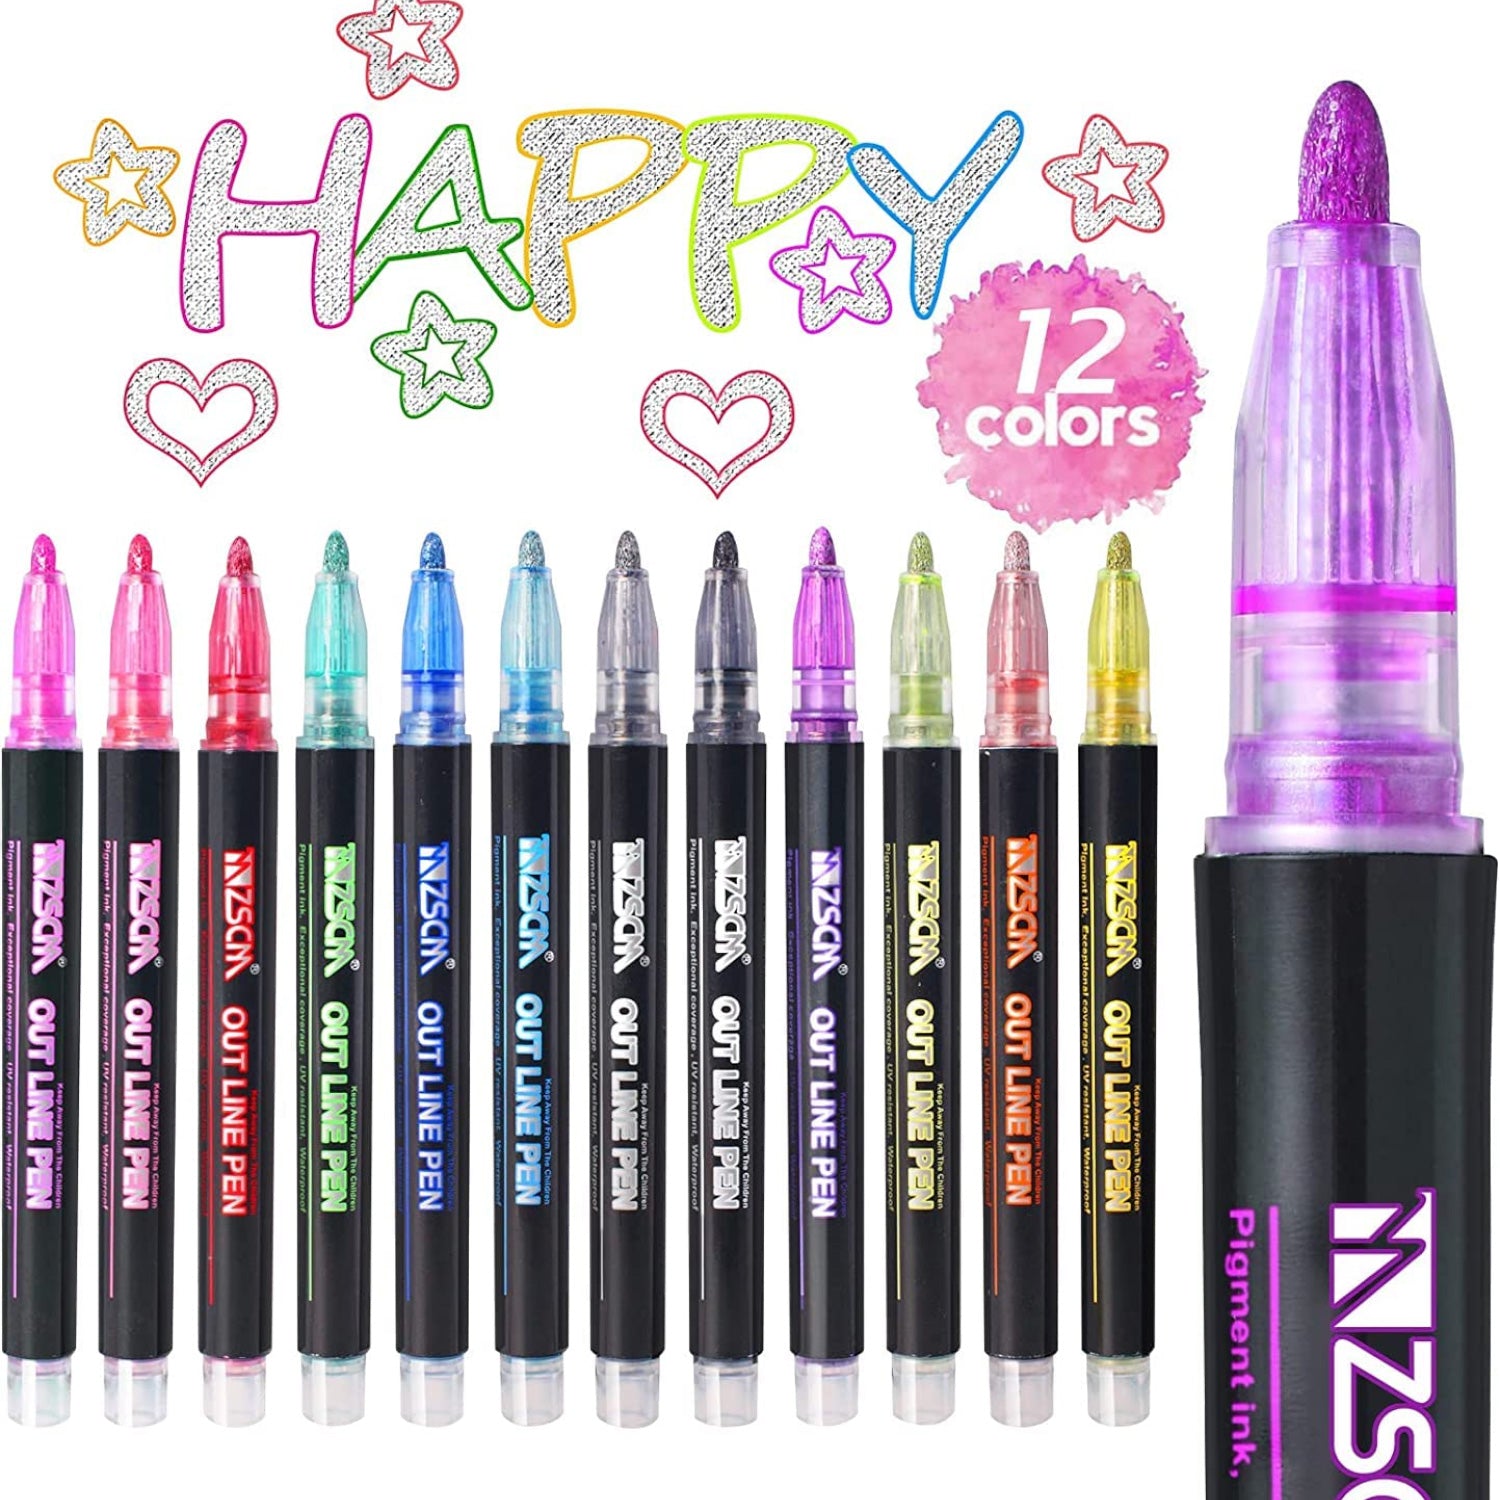 Marker Highlighters Pen | Out Line Pens in 12 Colors - for Girls, Boys, School, Crafts, Drawing, Birthday Gift & Return Gifts - Apkamart